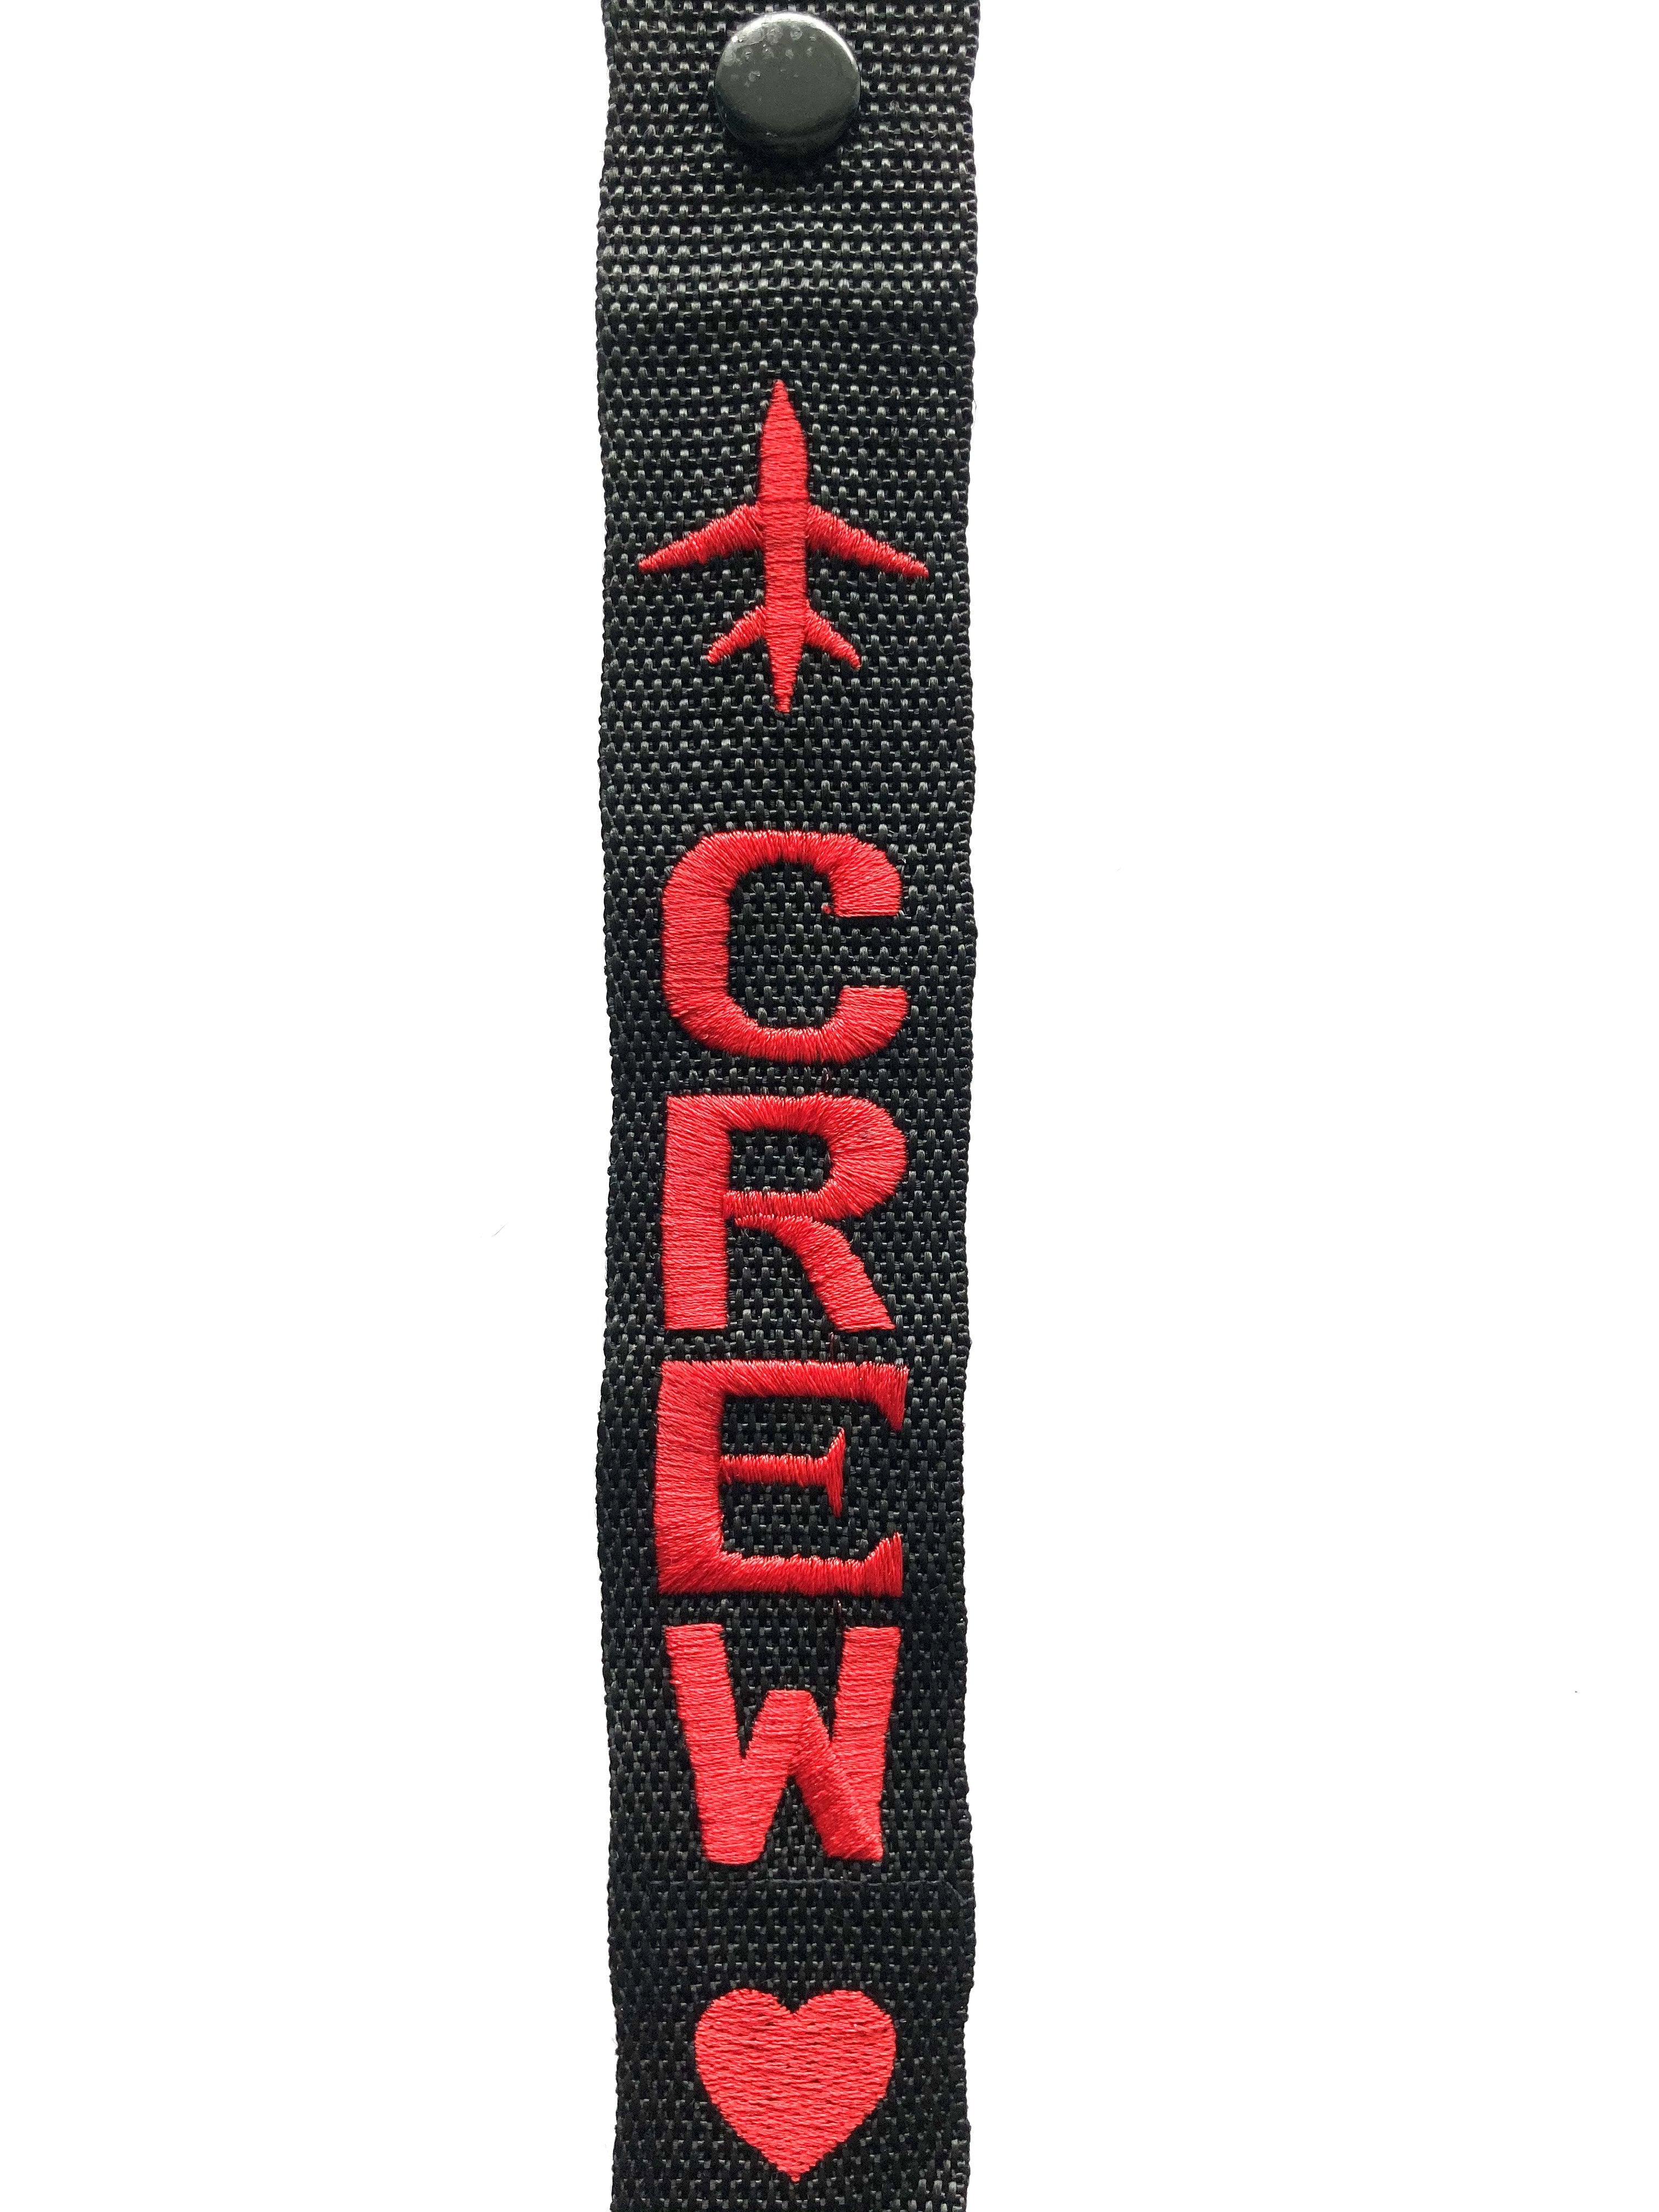 Crew Luggage Tag - RED heart